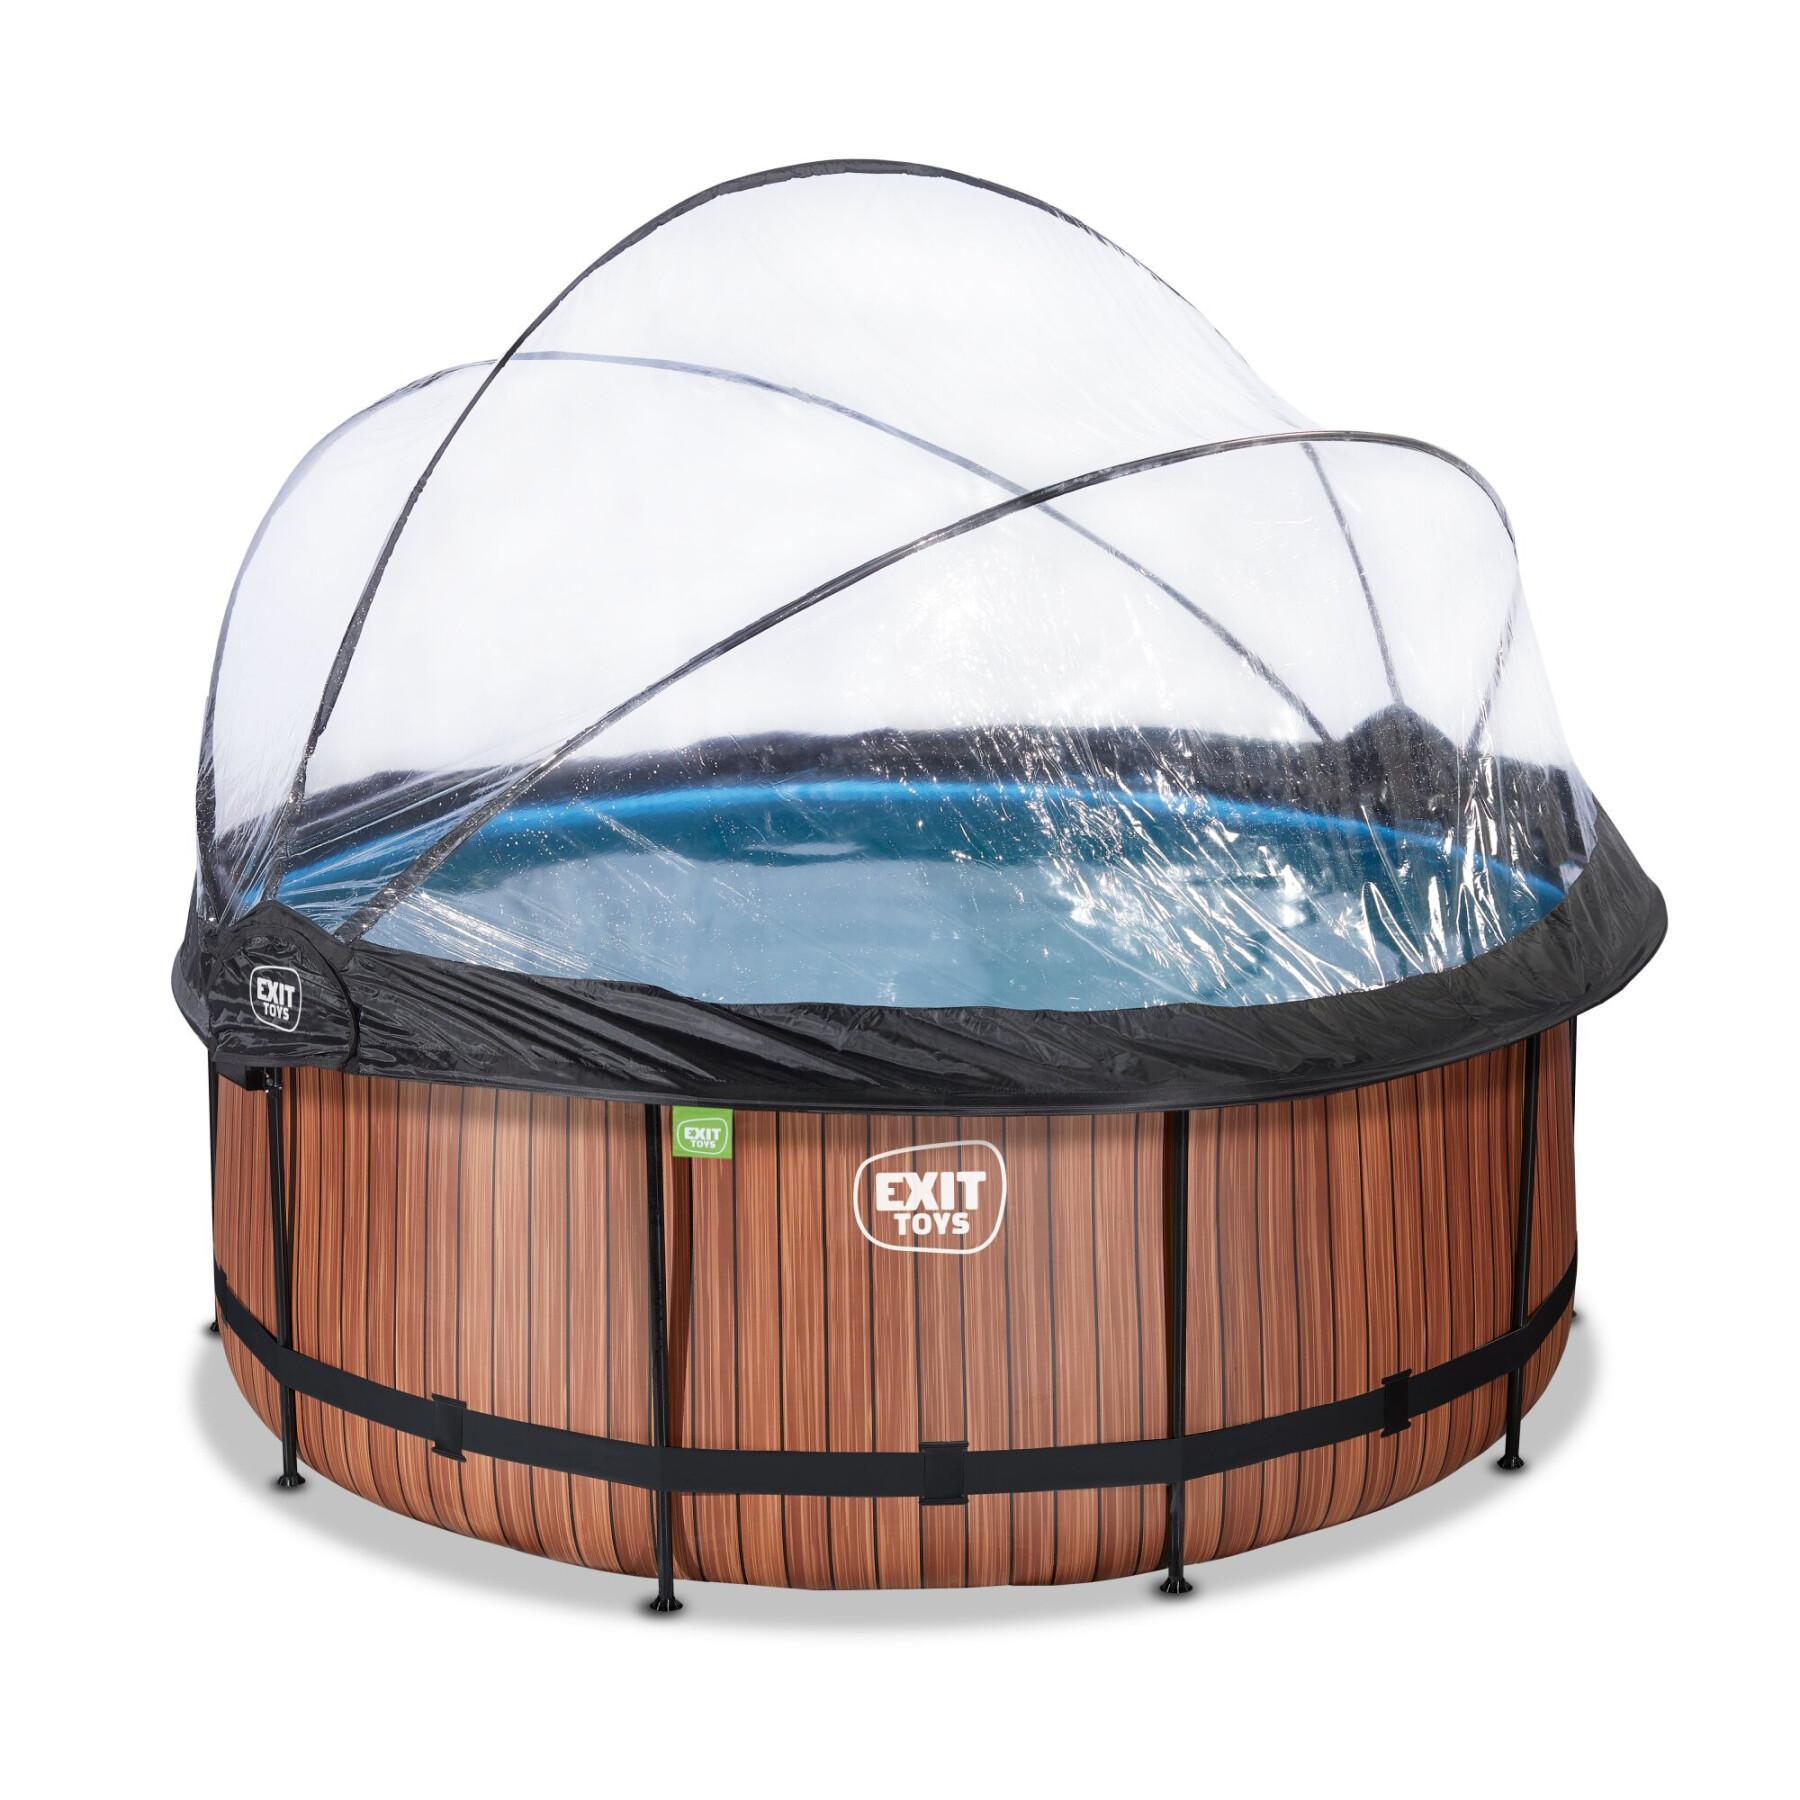 Swimming pool with sand filter pump and dome and child heat pump Exit Toys Wood 360 x 122 cm